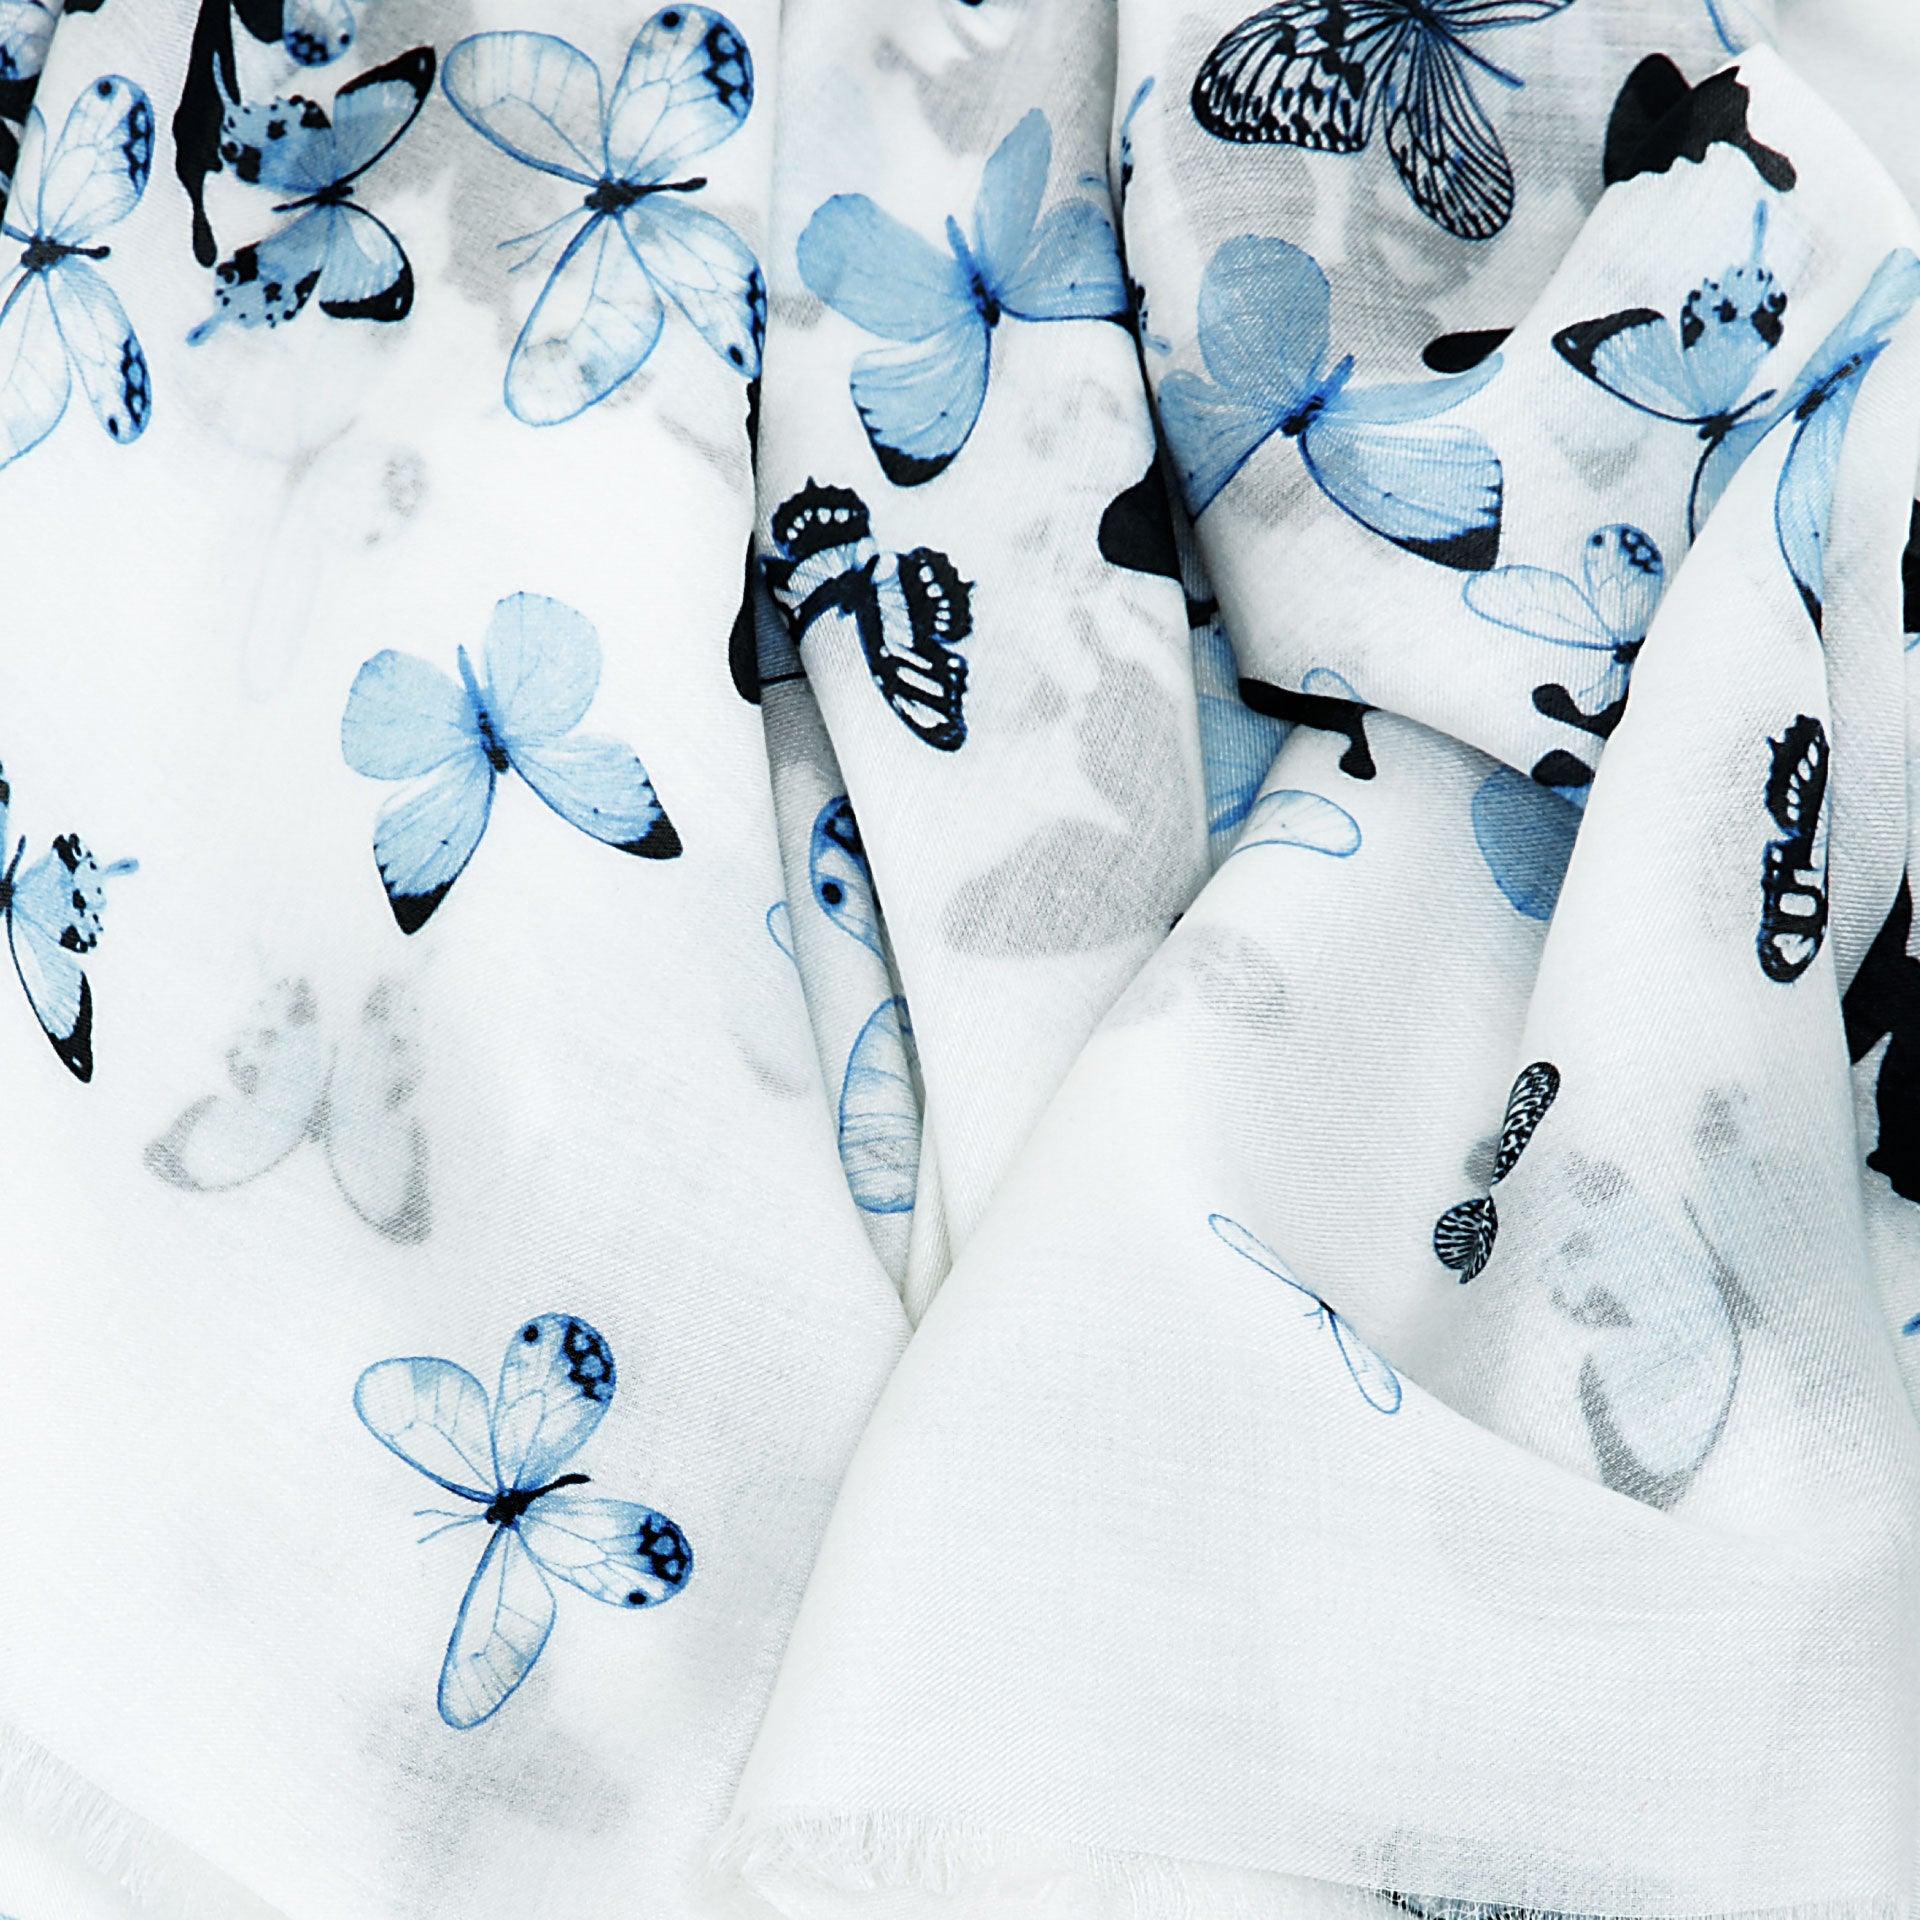 Sky Blue Butterflies Cashmere Blend Scarf - Fusion of London's design and Italian craftsmanship, a luxurious gift choice.